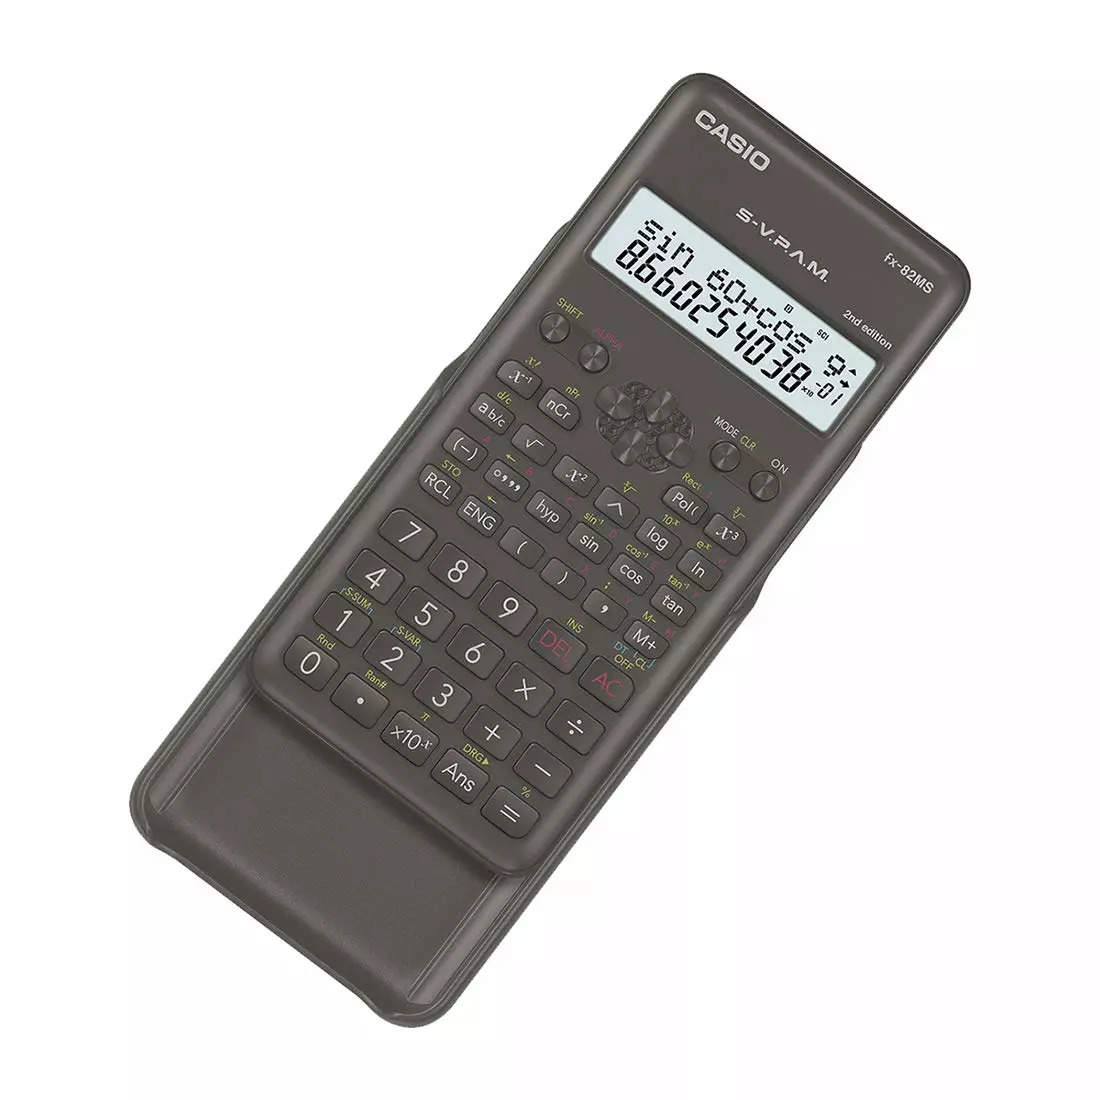 CasioFX-82MS2ndEd.ScientificCalculator